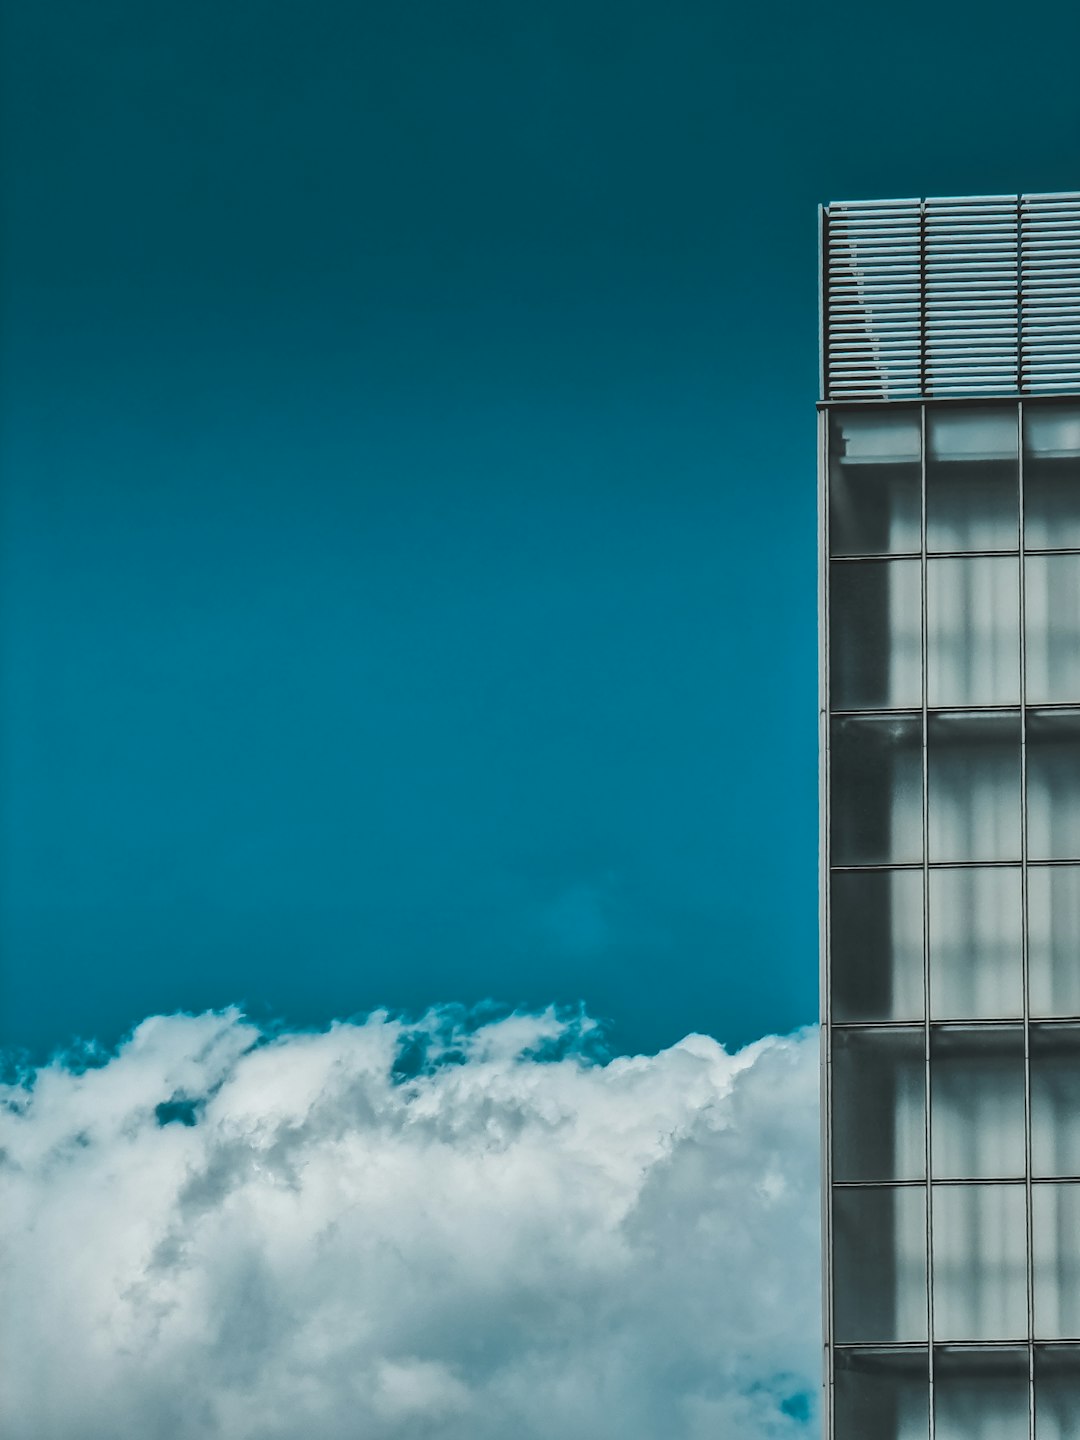 white clouds over glass building